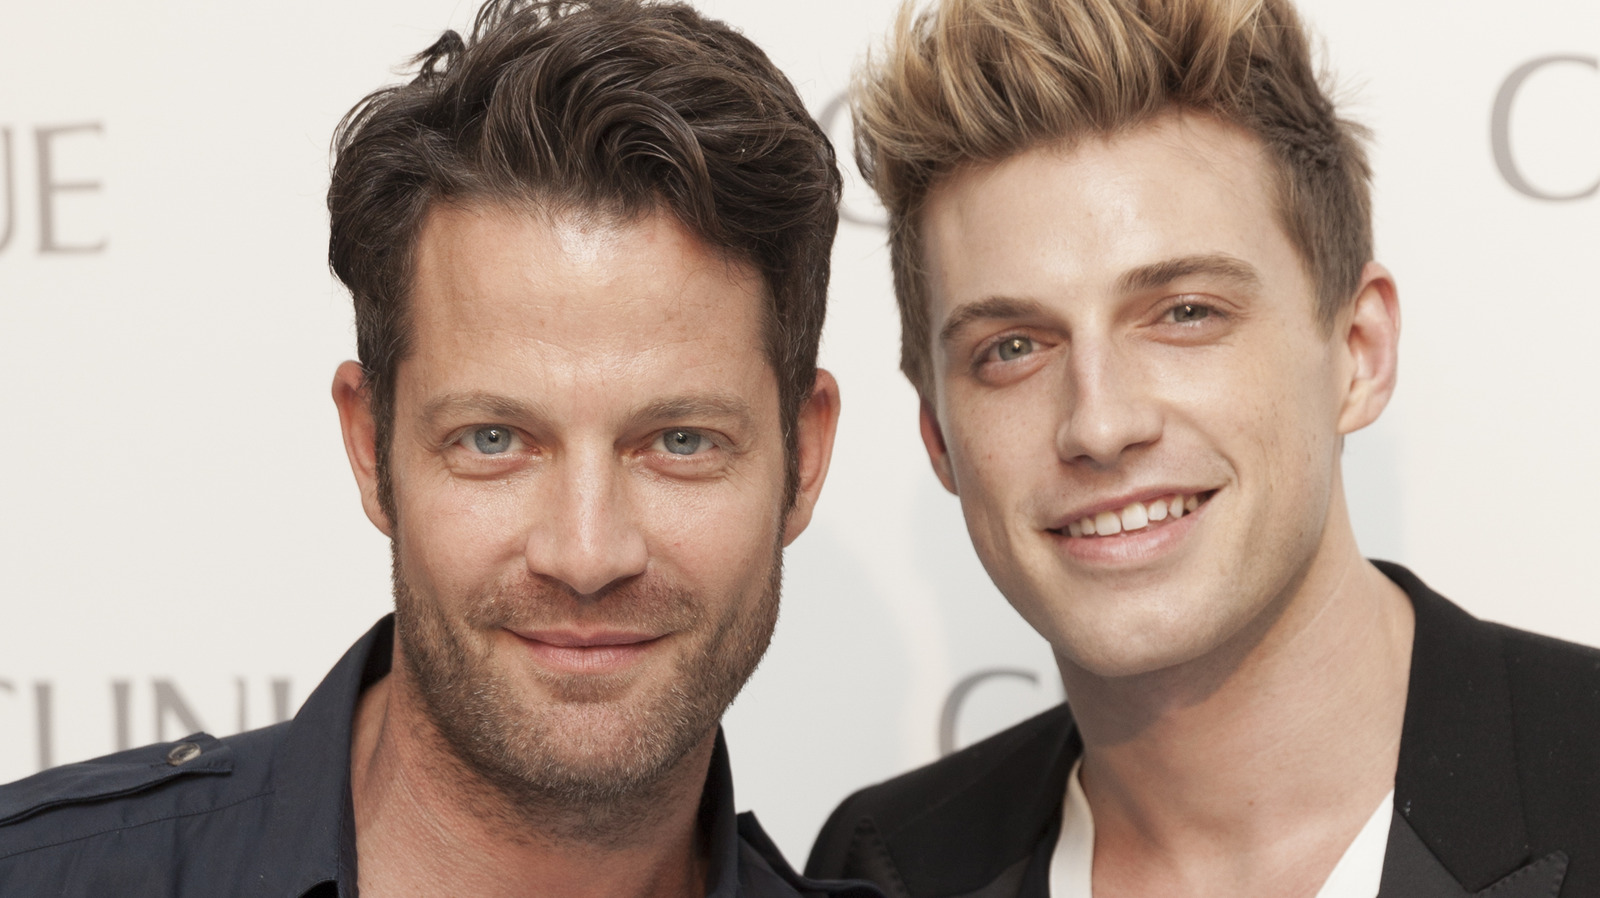 https://www.housedigest.com/img/gallery/hgtvs-nate-berkus-and-jeremiah-brent-prove-small-home-updates-yield-big-results/l-intro-1679688404.jpg